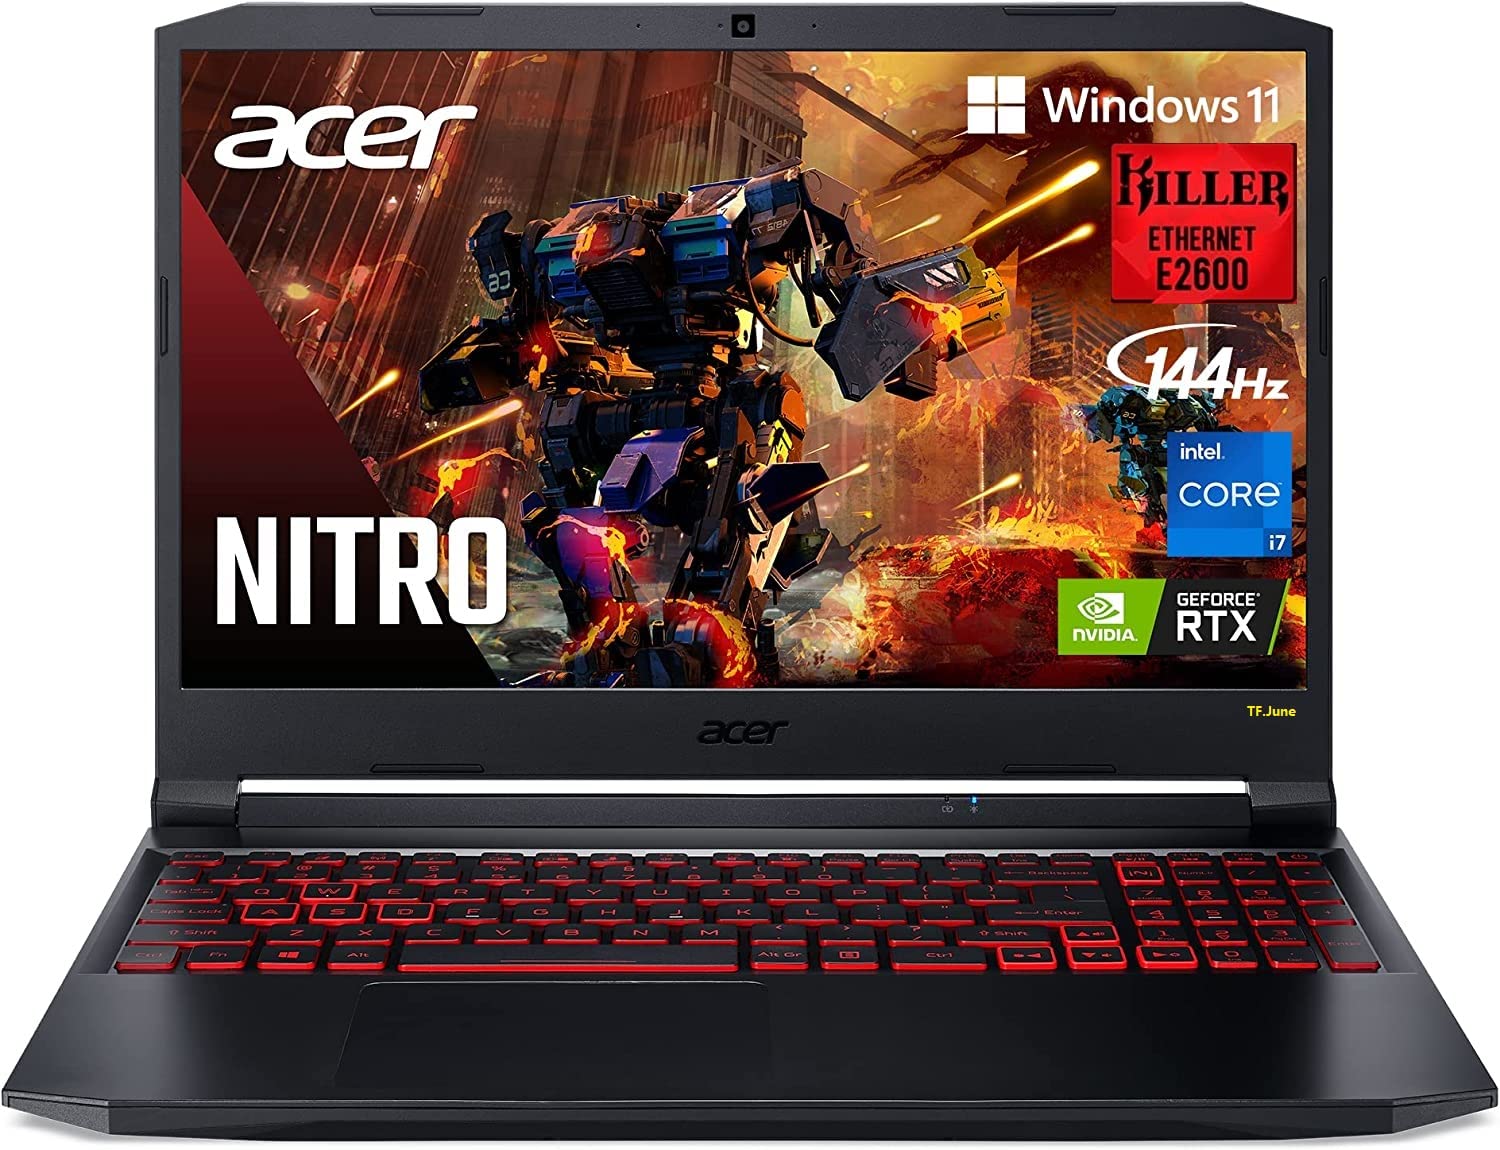 Acer Nitro 5 laptop constantly restarting and rebooting